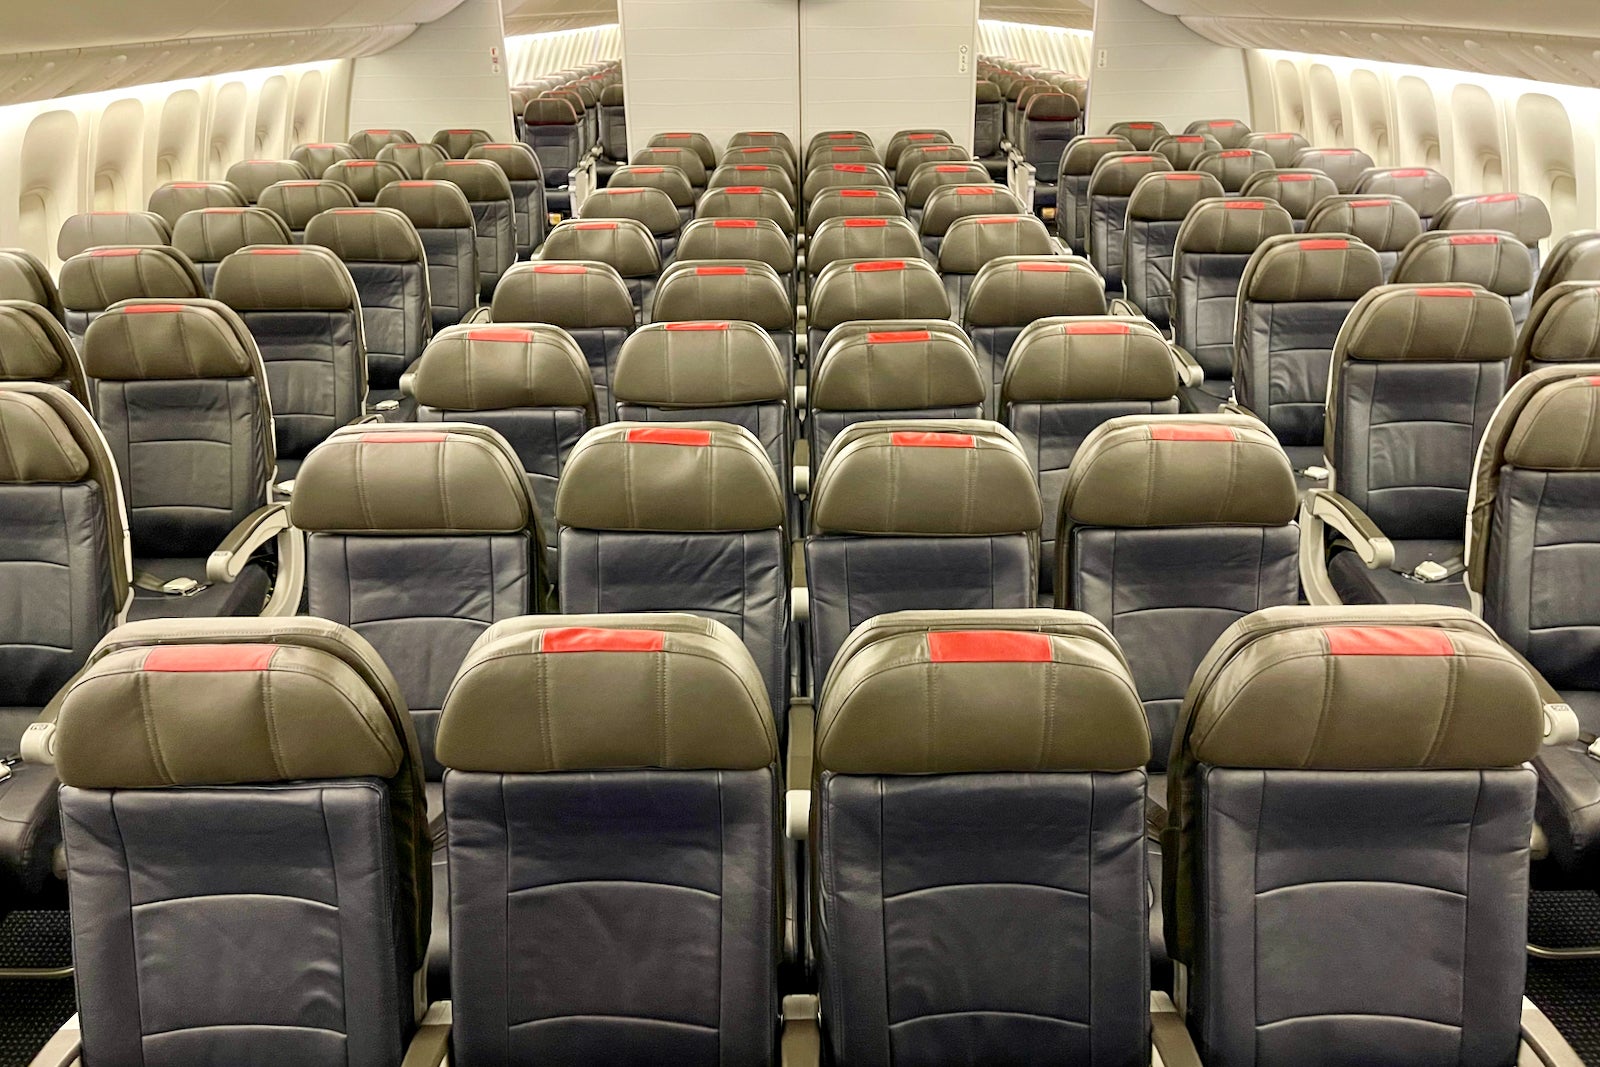 American Airlines Main Cabin Coach Economy Boeing 777-300ER